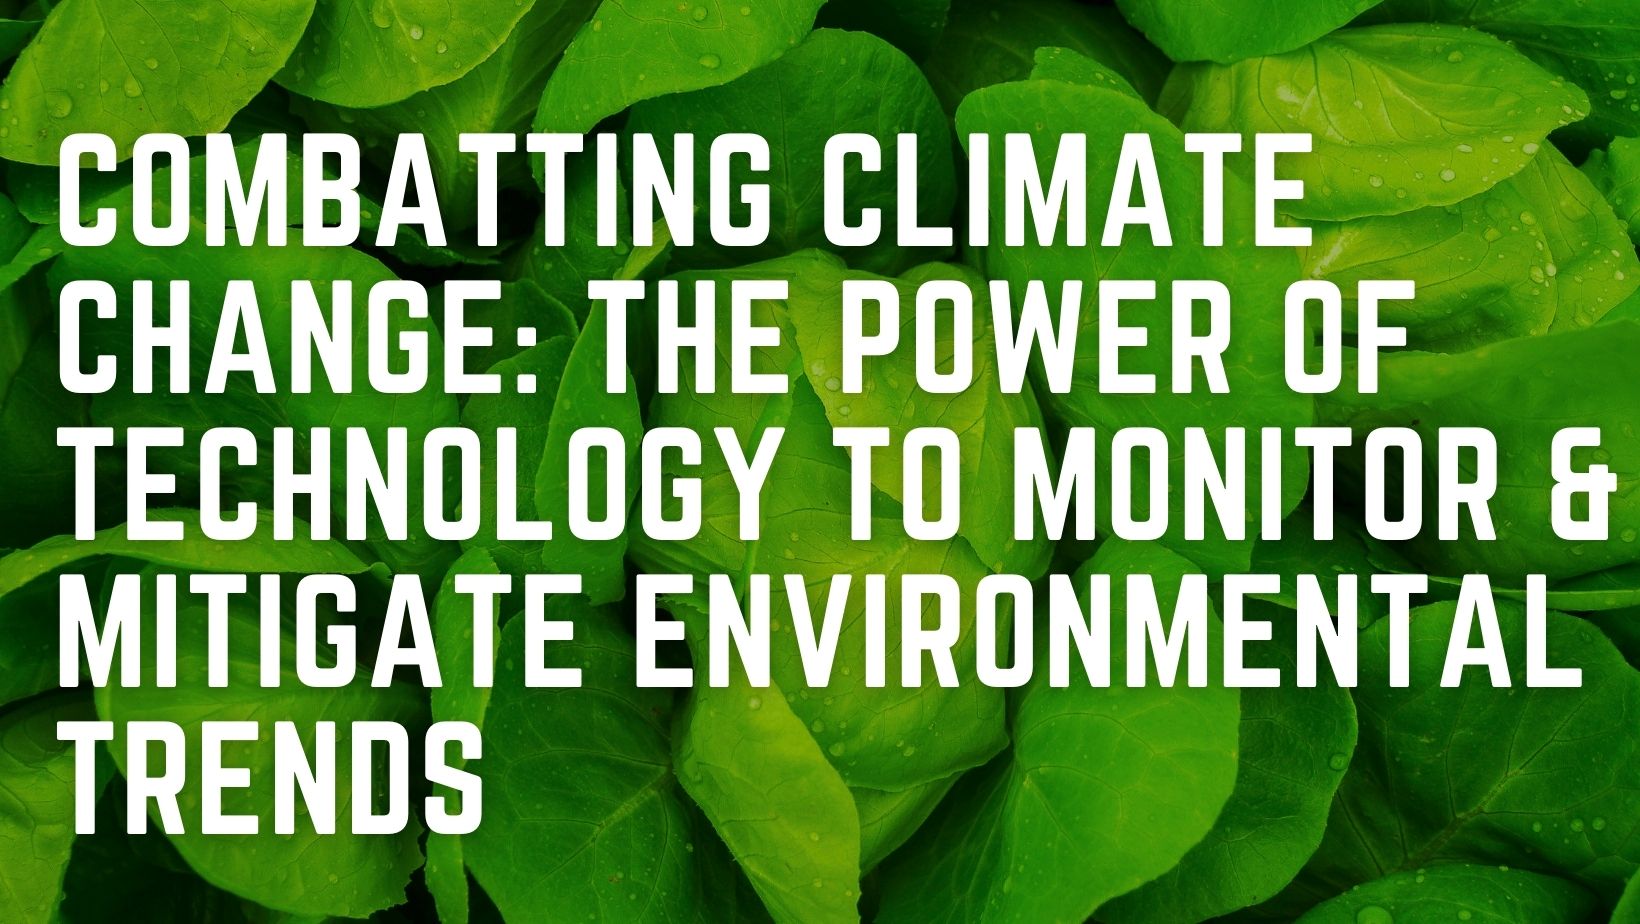 Combatting Climate Change: The Power of Technology to Monitor and Mitigate Environmental Trends